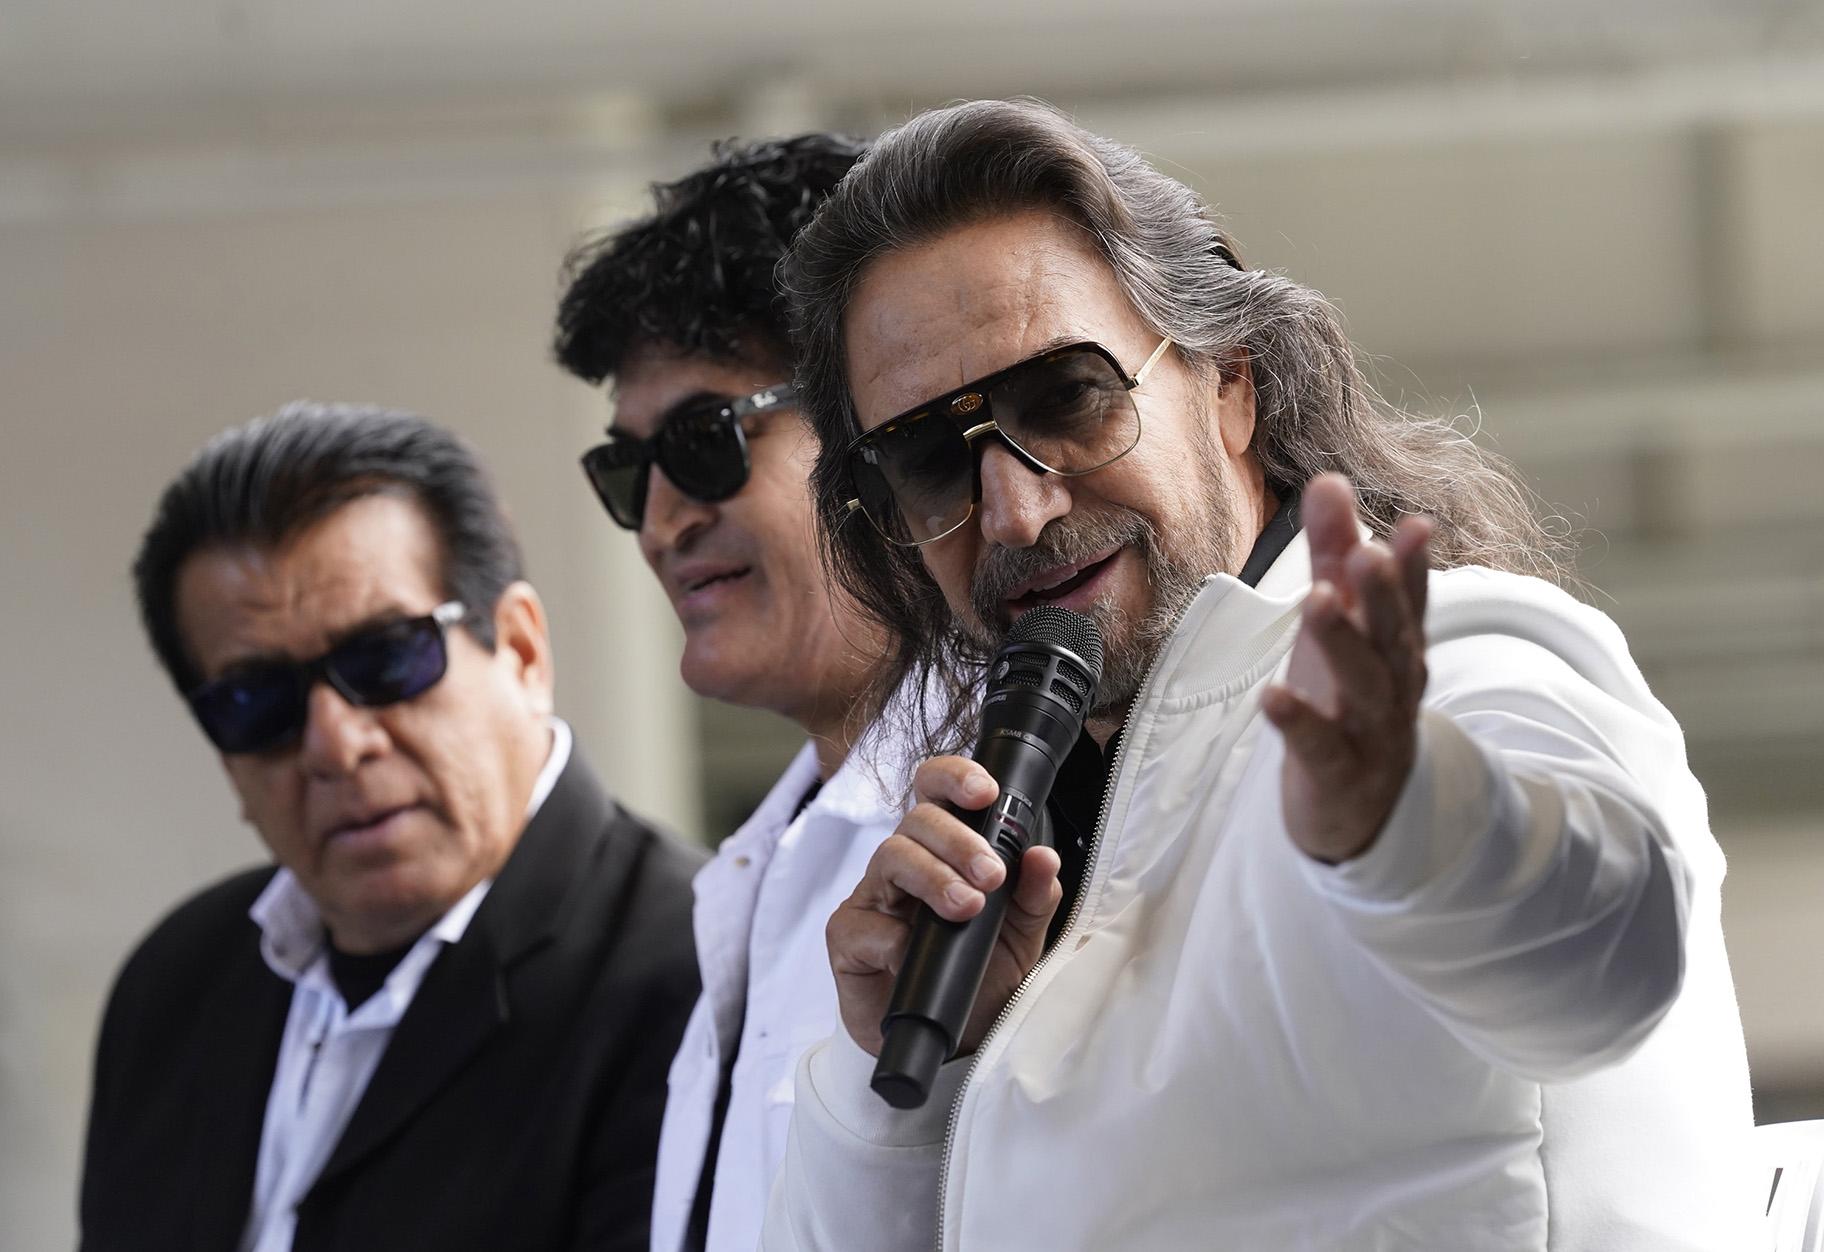 Members of the Mexican grupera band Los Bukis, from left, Pedro Sanchez, Roberto Guadarrama and Marco Antonio Solis attend a press conference at SoFi Stadium on Monday, June 14, 2021, in Inglewood, Calif. (AP Photo / Chris Pizzello)